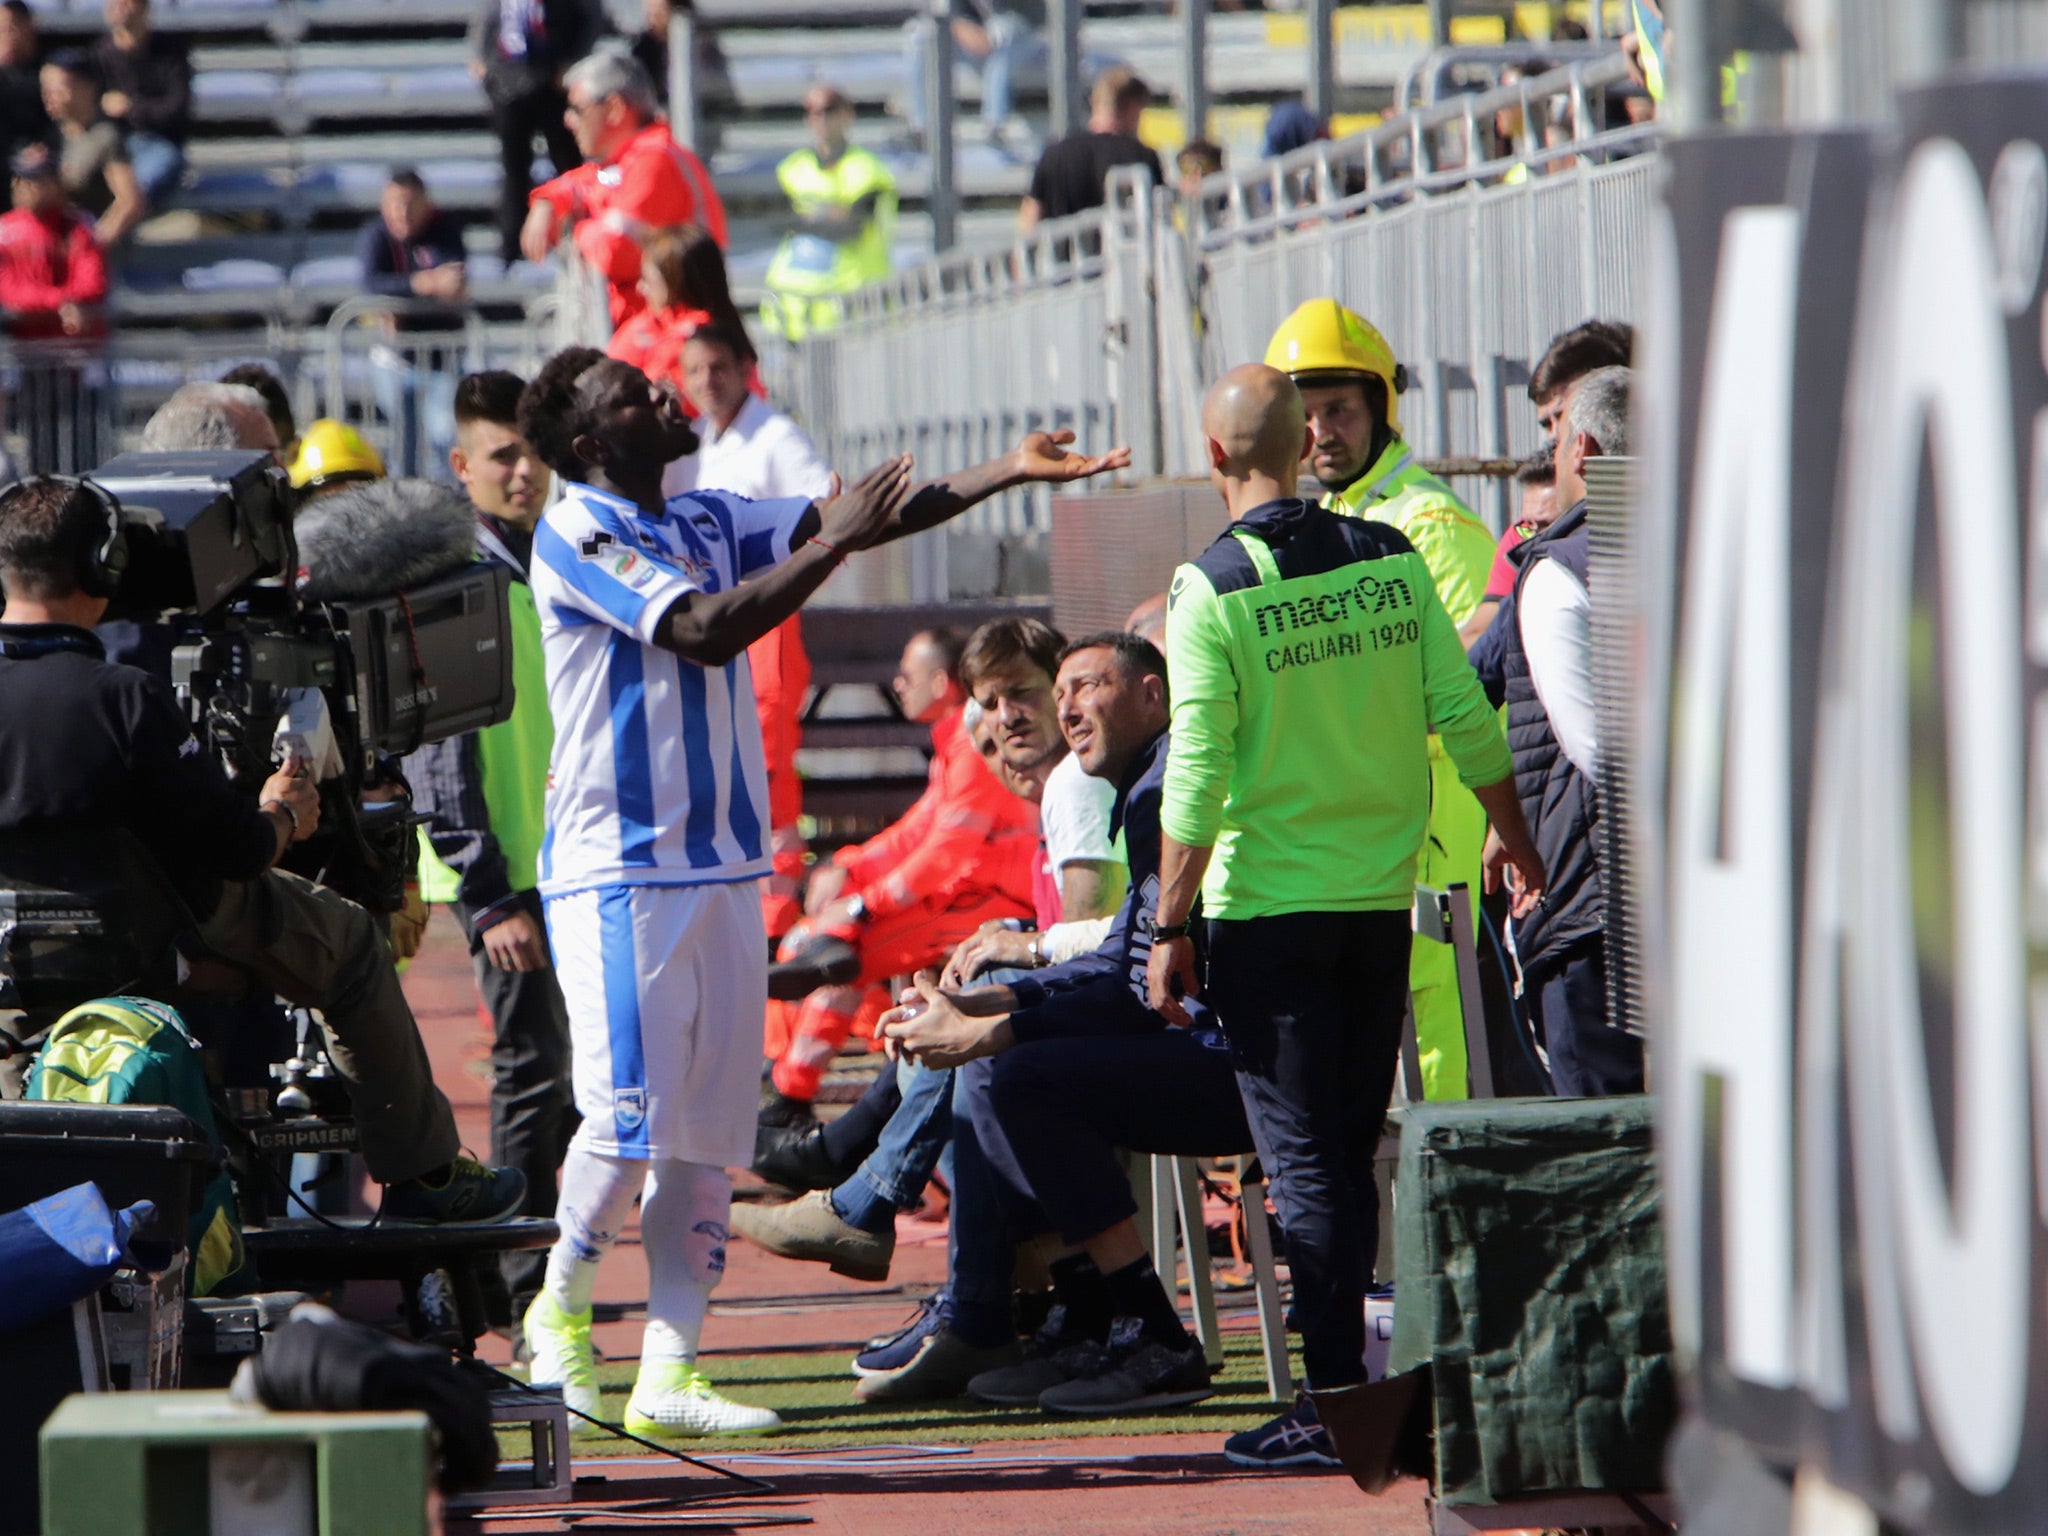 Muntari confronted the fans who abused him